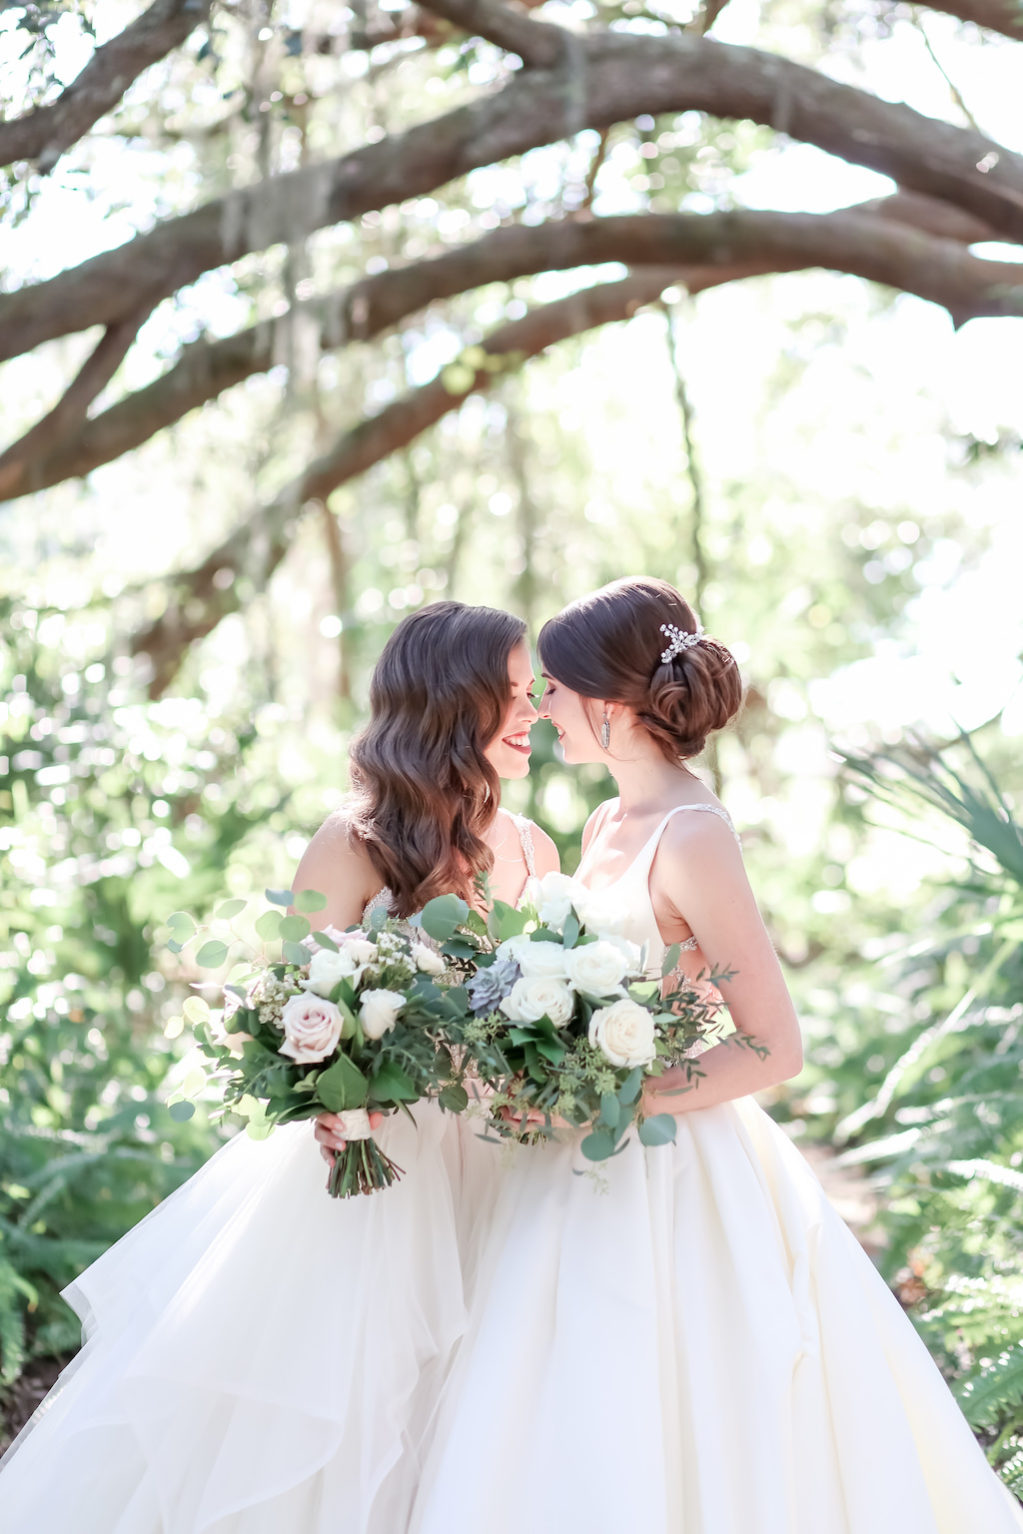 Florida Bride and Bride First Look Lesbian Gay Couple Wedding Portrait with Organic Garden Inspired White, Ivory, Blush Pink and Greenery Wedding Floral Bouquets | Tampa Bay Wedding Photographer Lifelong Photography Studio | Wedding Planner Love Lee Lane